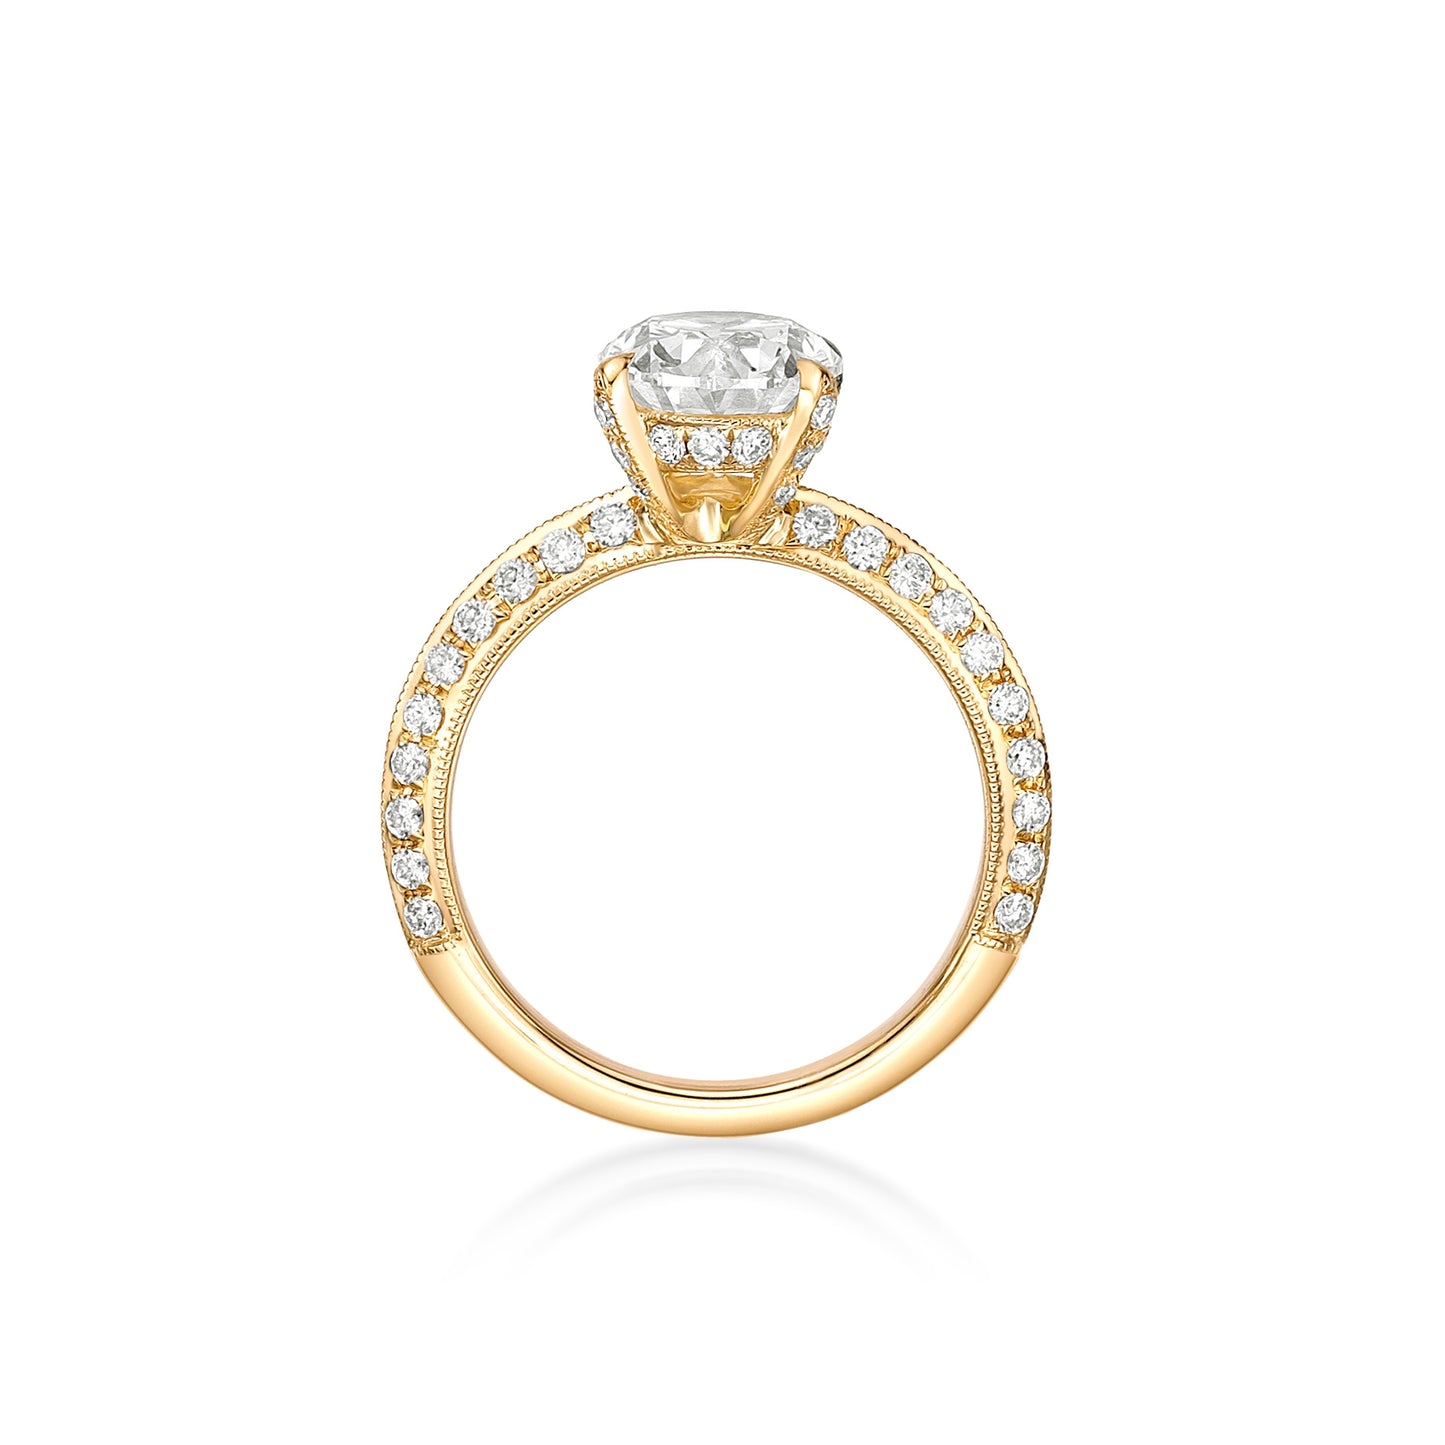 2.01ct Oval Brilliant diamond in a Vintage style 18K Yellow Gold engagement ring setting featuring a knife-edge diamond eternity band